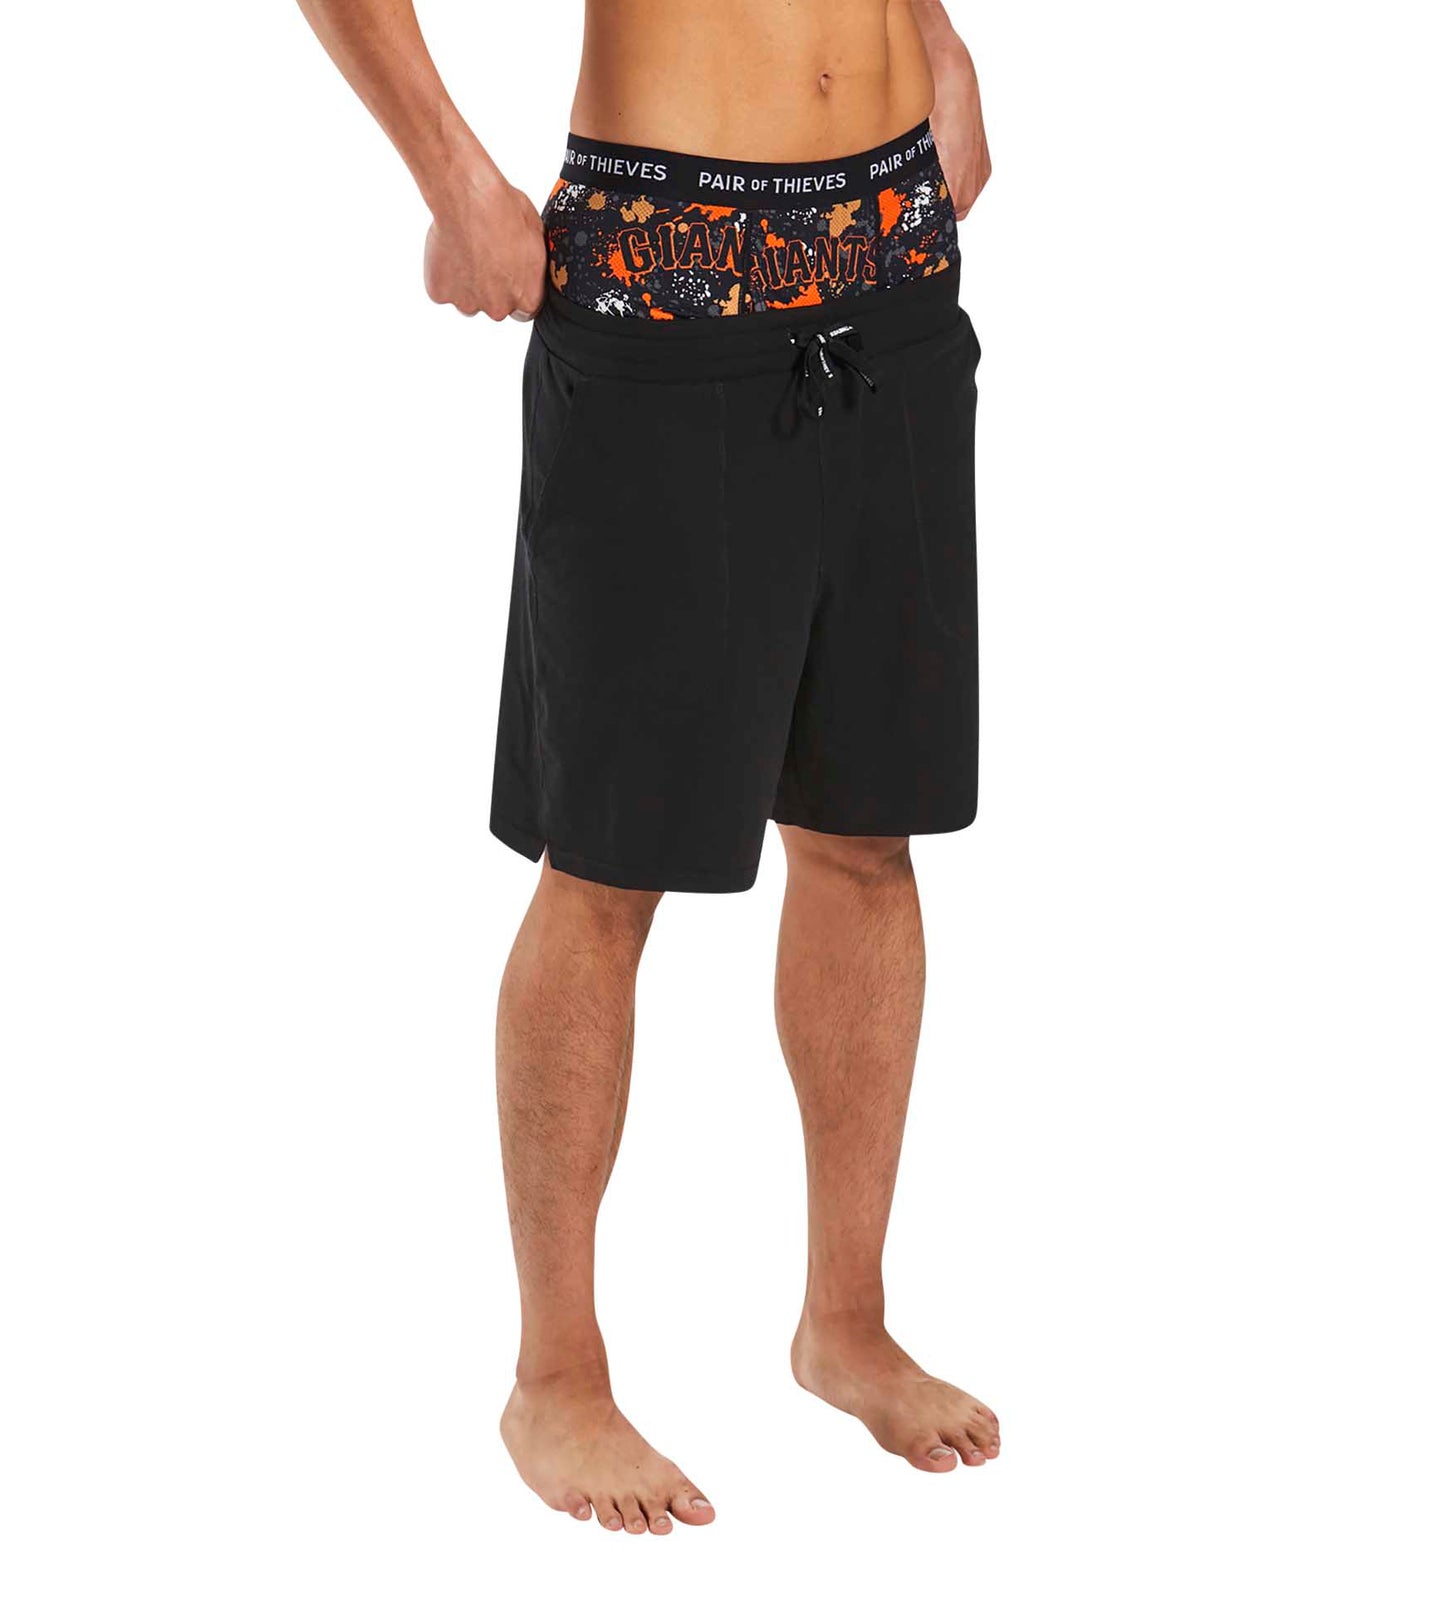 MLB San Francisco Giants SuperFit Boxer Brief 2 Pack containing the colors Dark slate gray, Indian red, Sienna, Black, Indian red, Tan, Dark salmon, Dark olive green, Chocolate